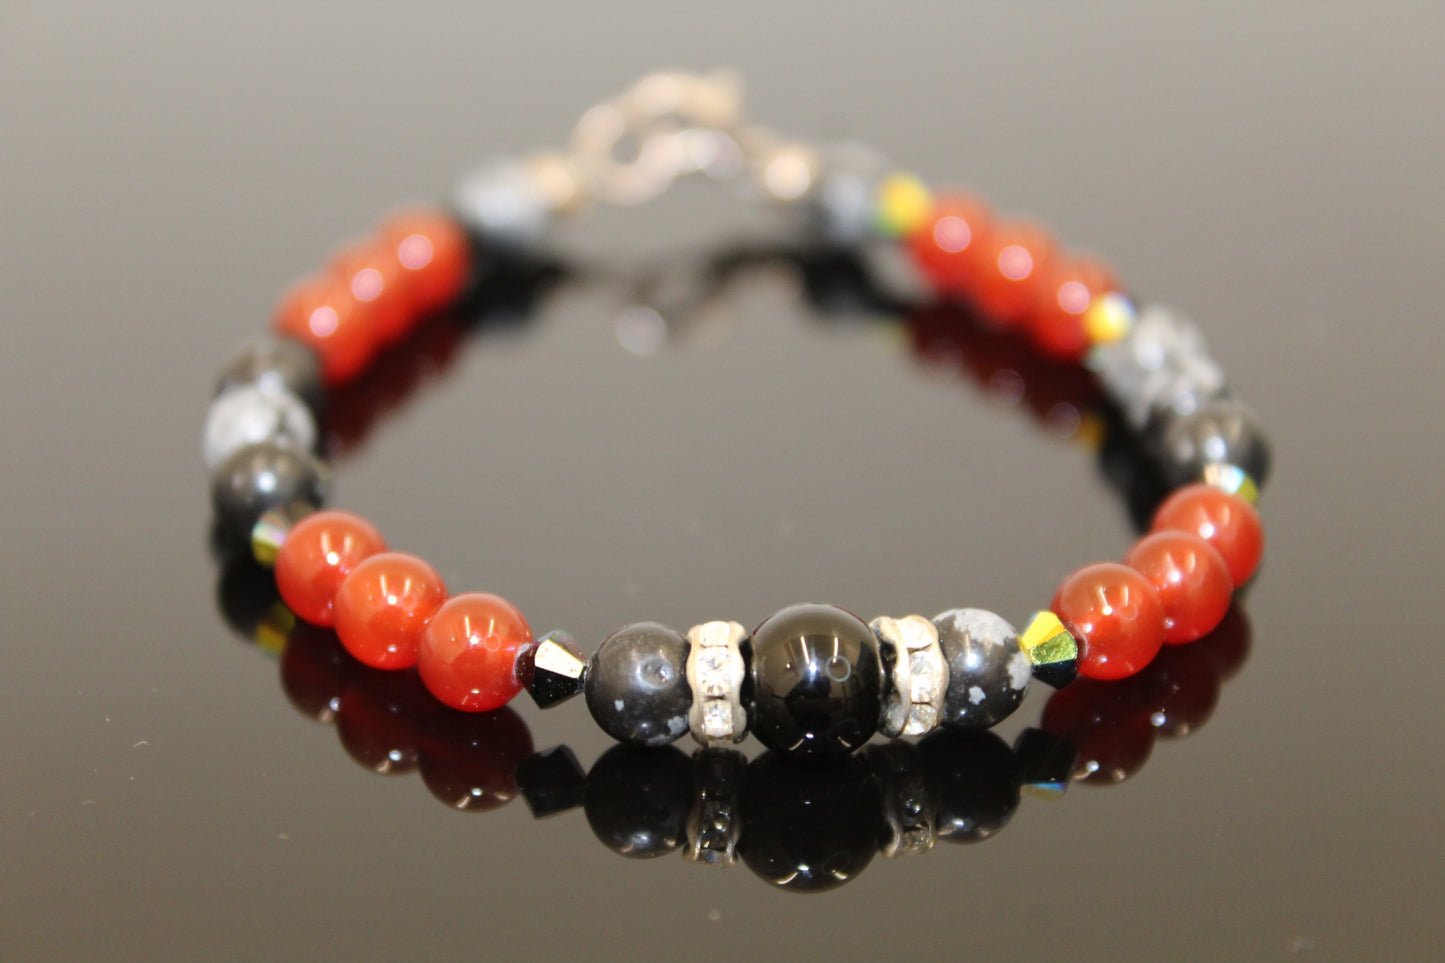 Red Agate, Dalmatian Obsidian and Onyx Crystal Bracelet